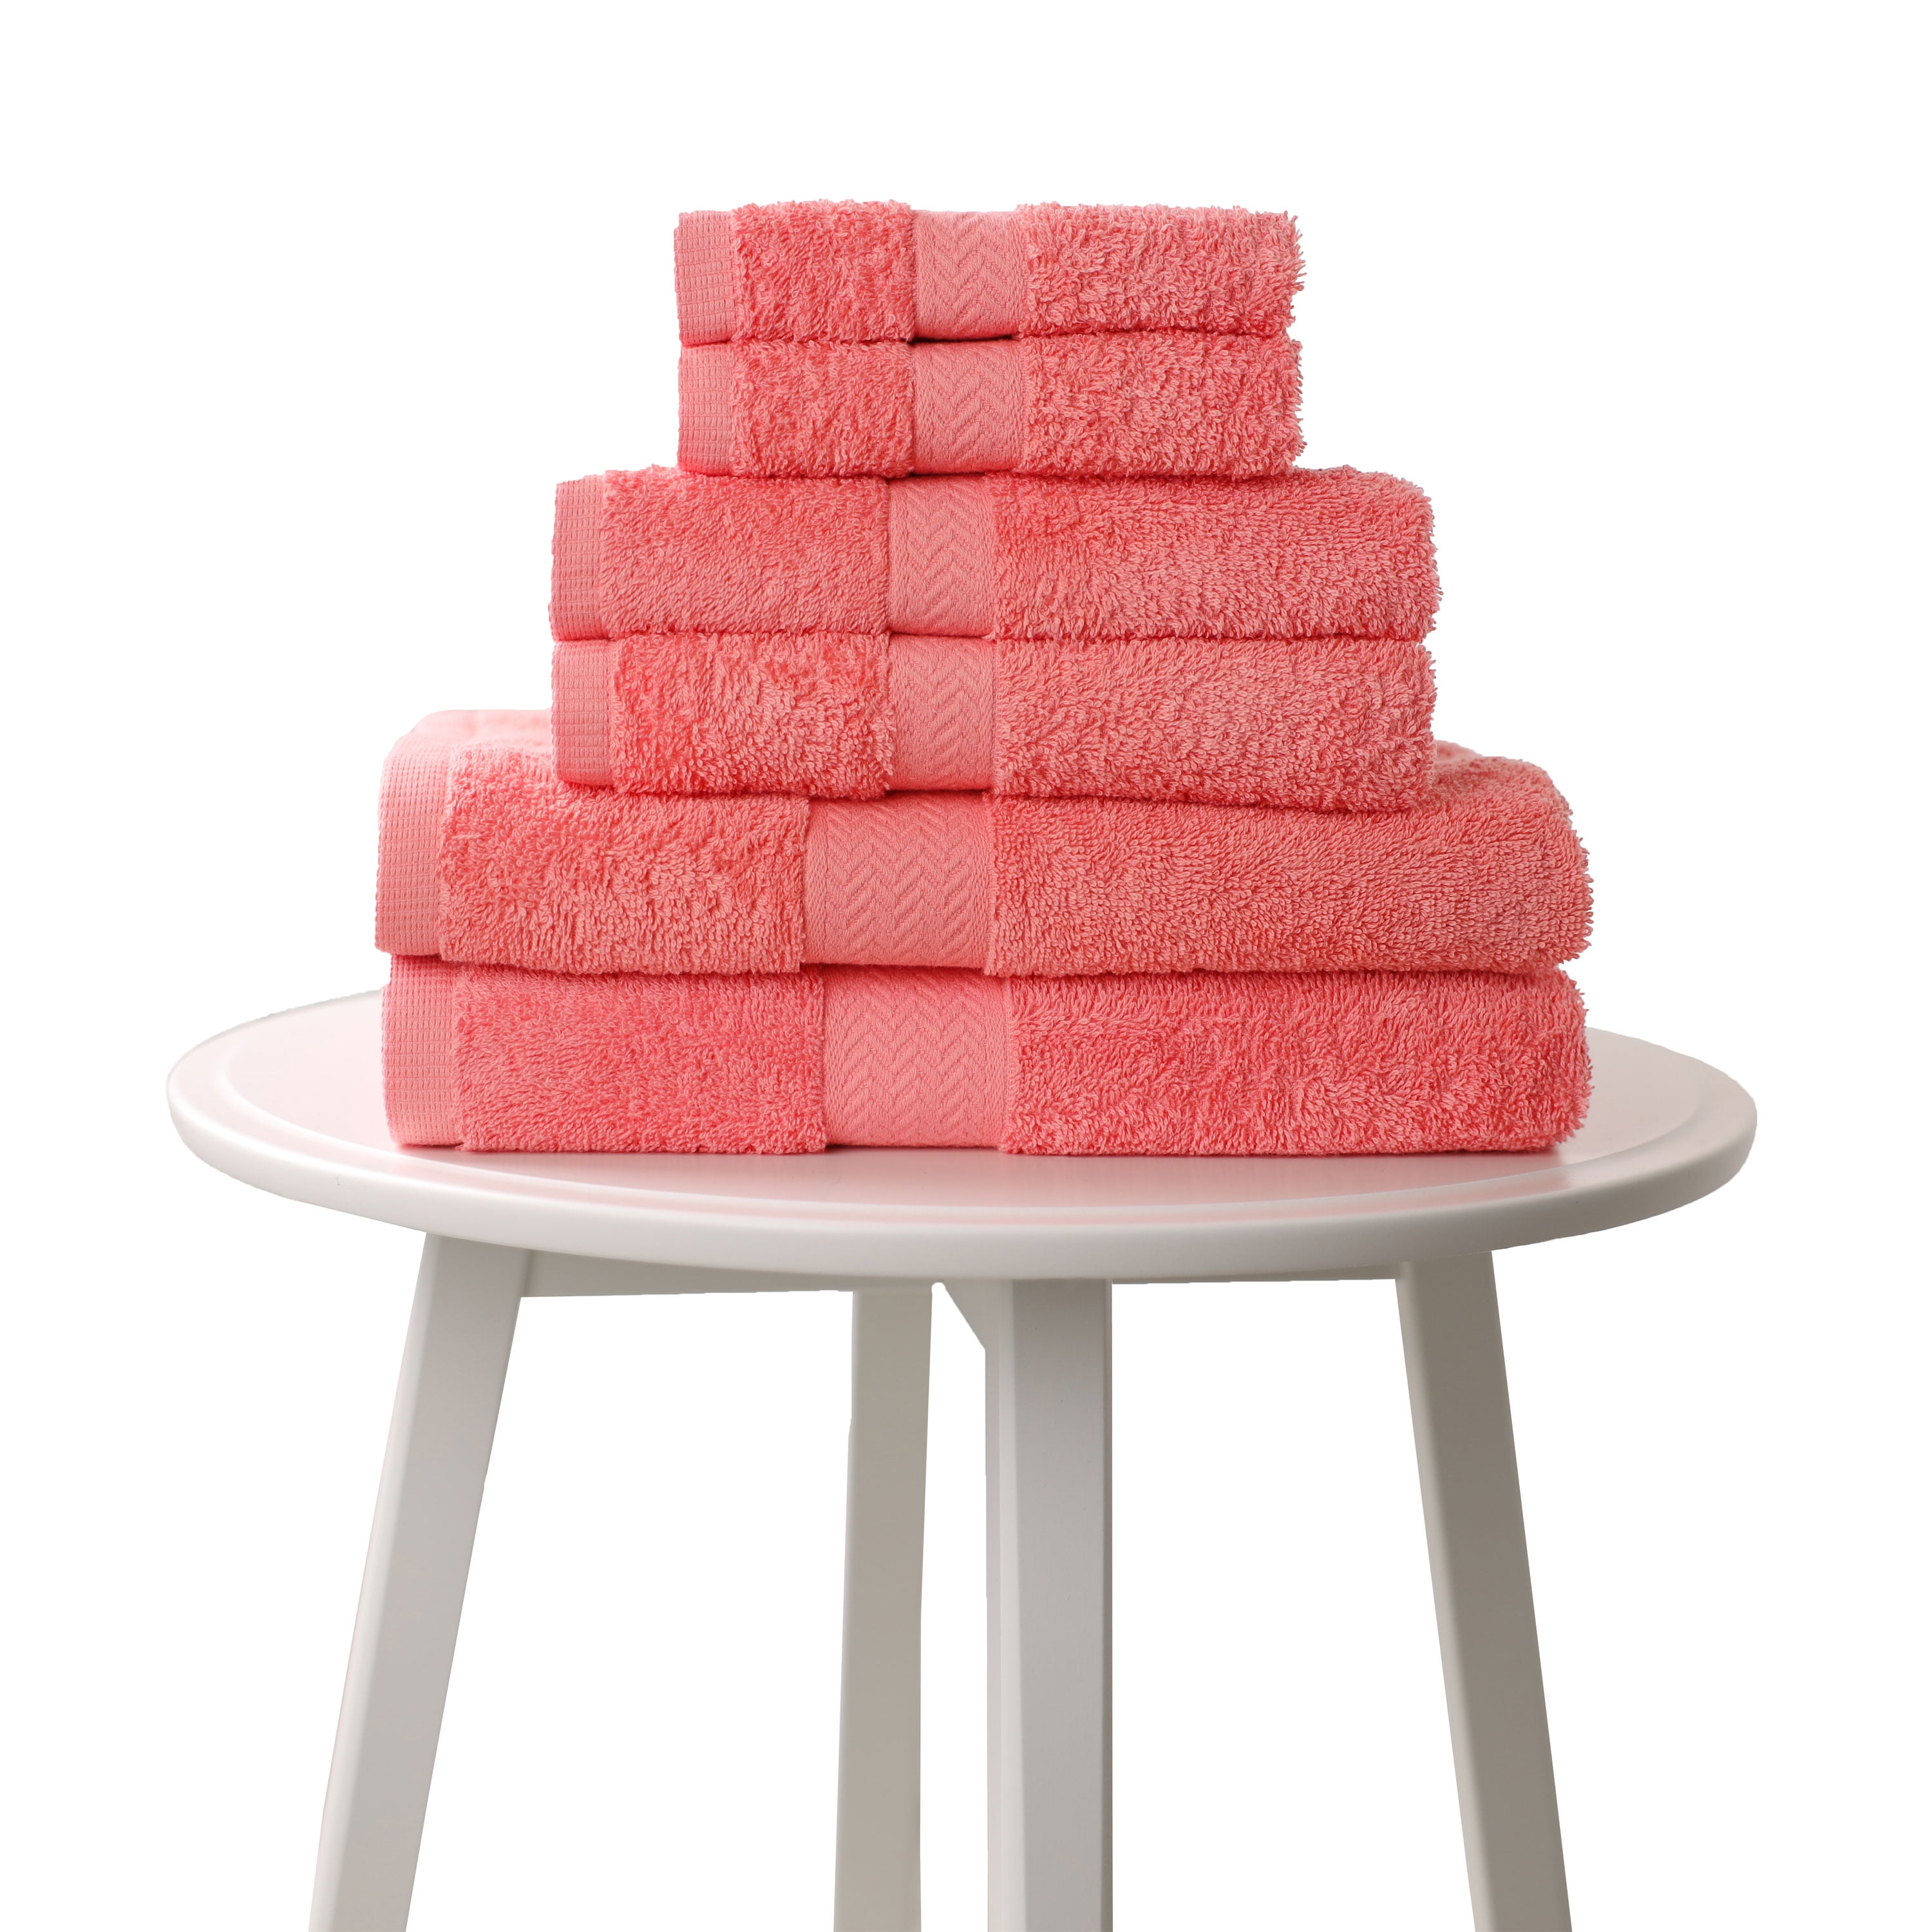 6-Piece Premium Towel Set, 2 Bath Towels, 2 Hand Towels, and 2 Wash Cloths,  600 GSM 100% Ring Spun Cotton Highly Absorbent Towels for Bathroom, Gym,  Hotel, and Spa - NoahArkLinen